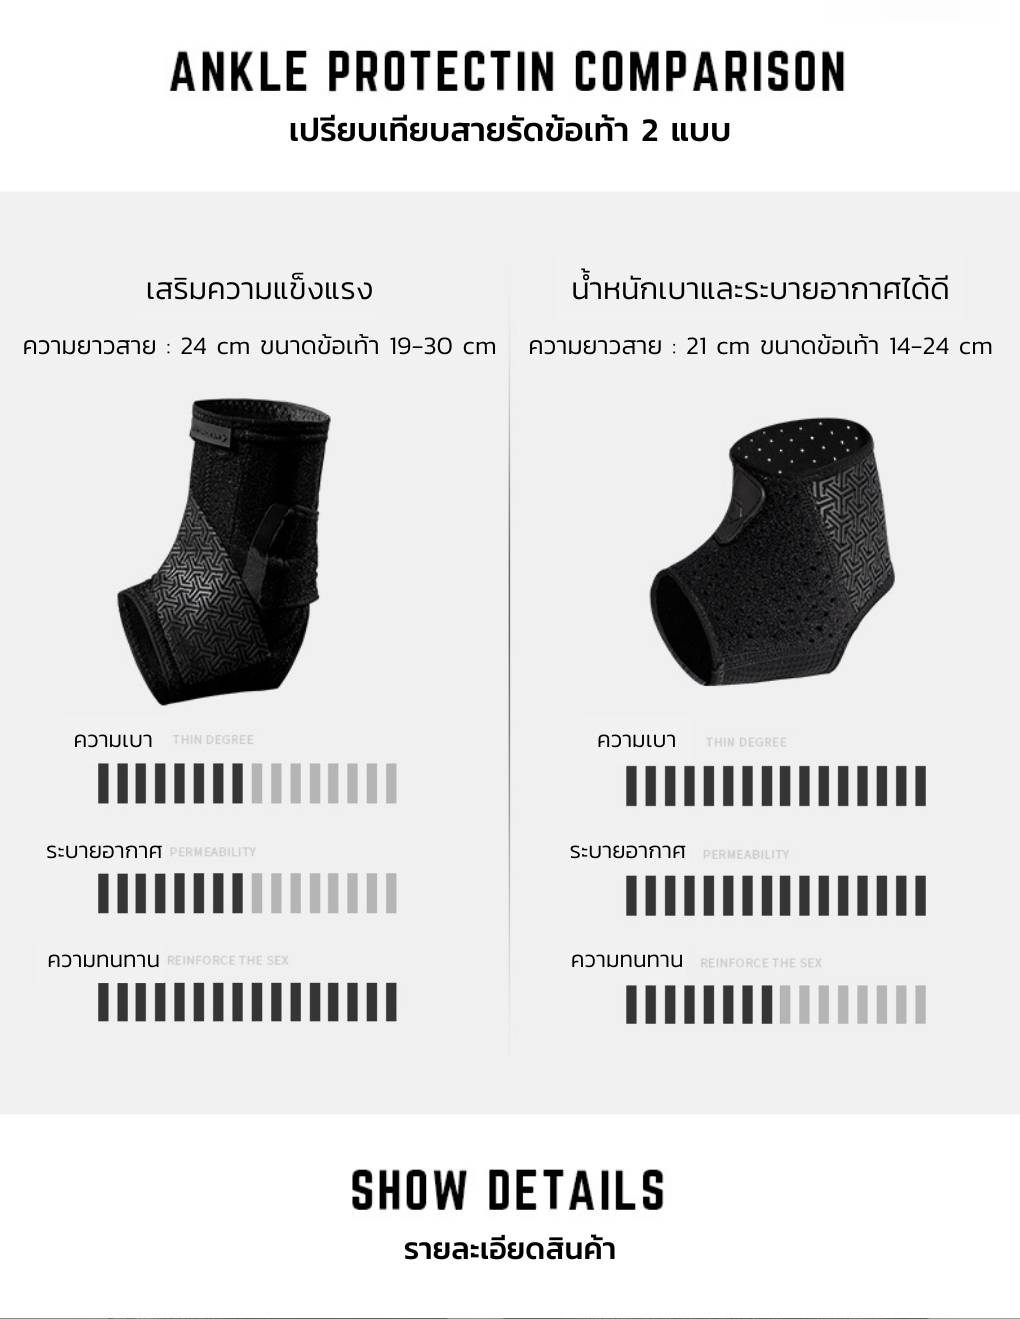 EXTREME ANKLE SUPPORT - Fittergear Thailand